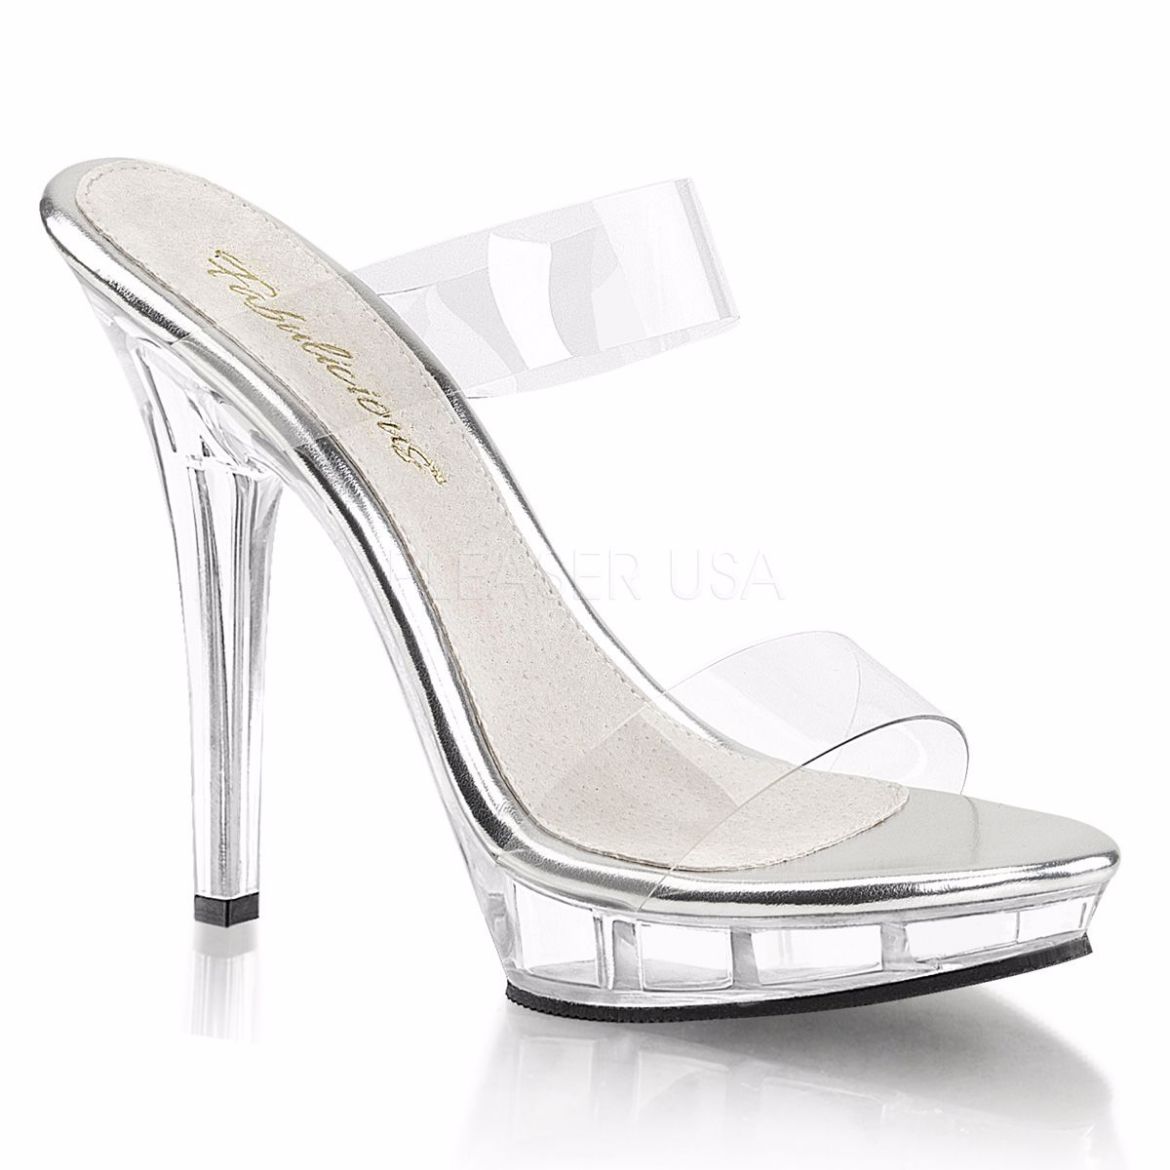 Product image of Fabulicious Lip-102-1 Clear/Clear, 5 inch (12.7 cm) Heel, 3/4 inch (1.9 cm) Platform Slide Mule Shoes